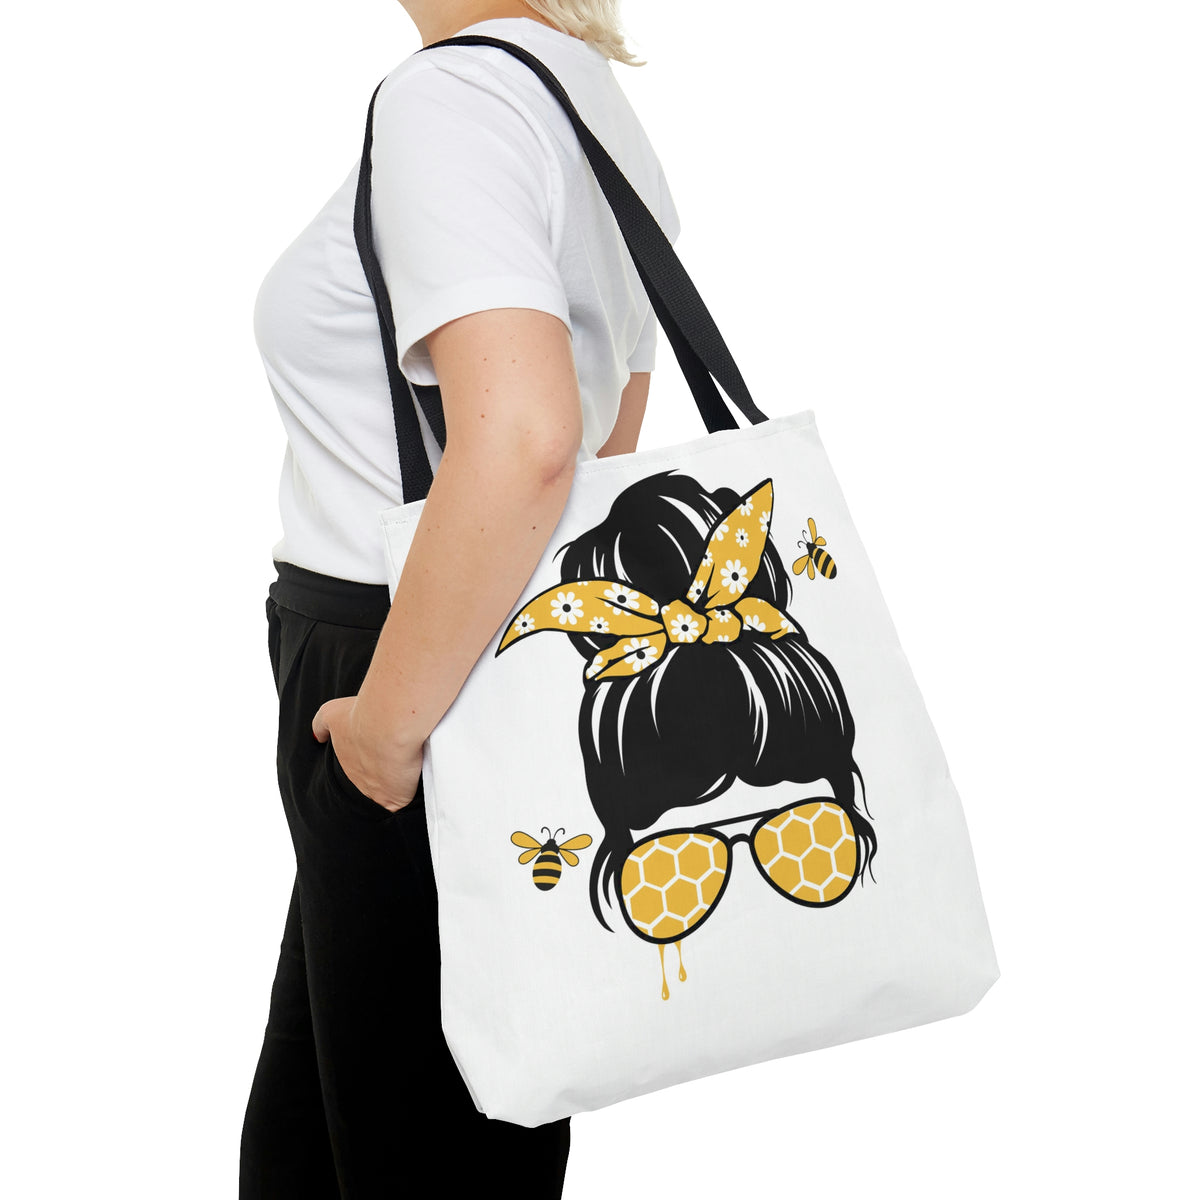 Bee Momma Tote Bag